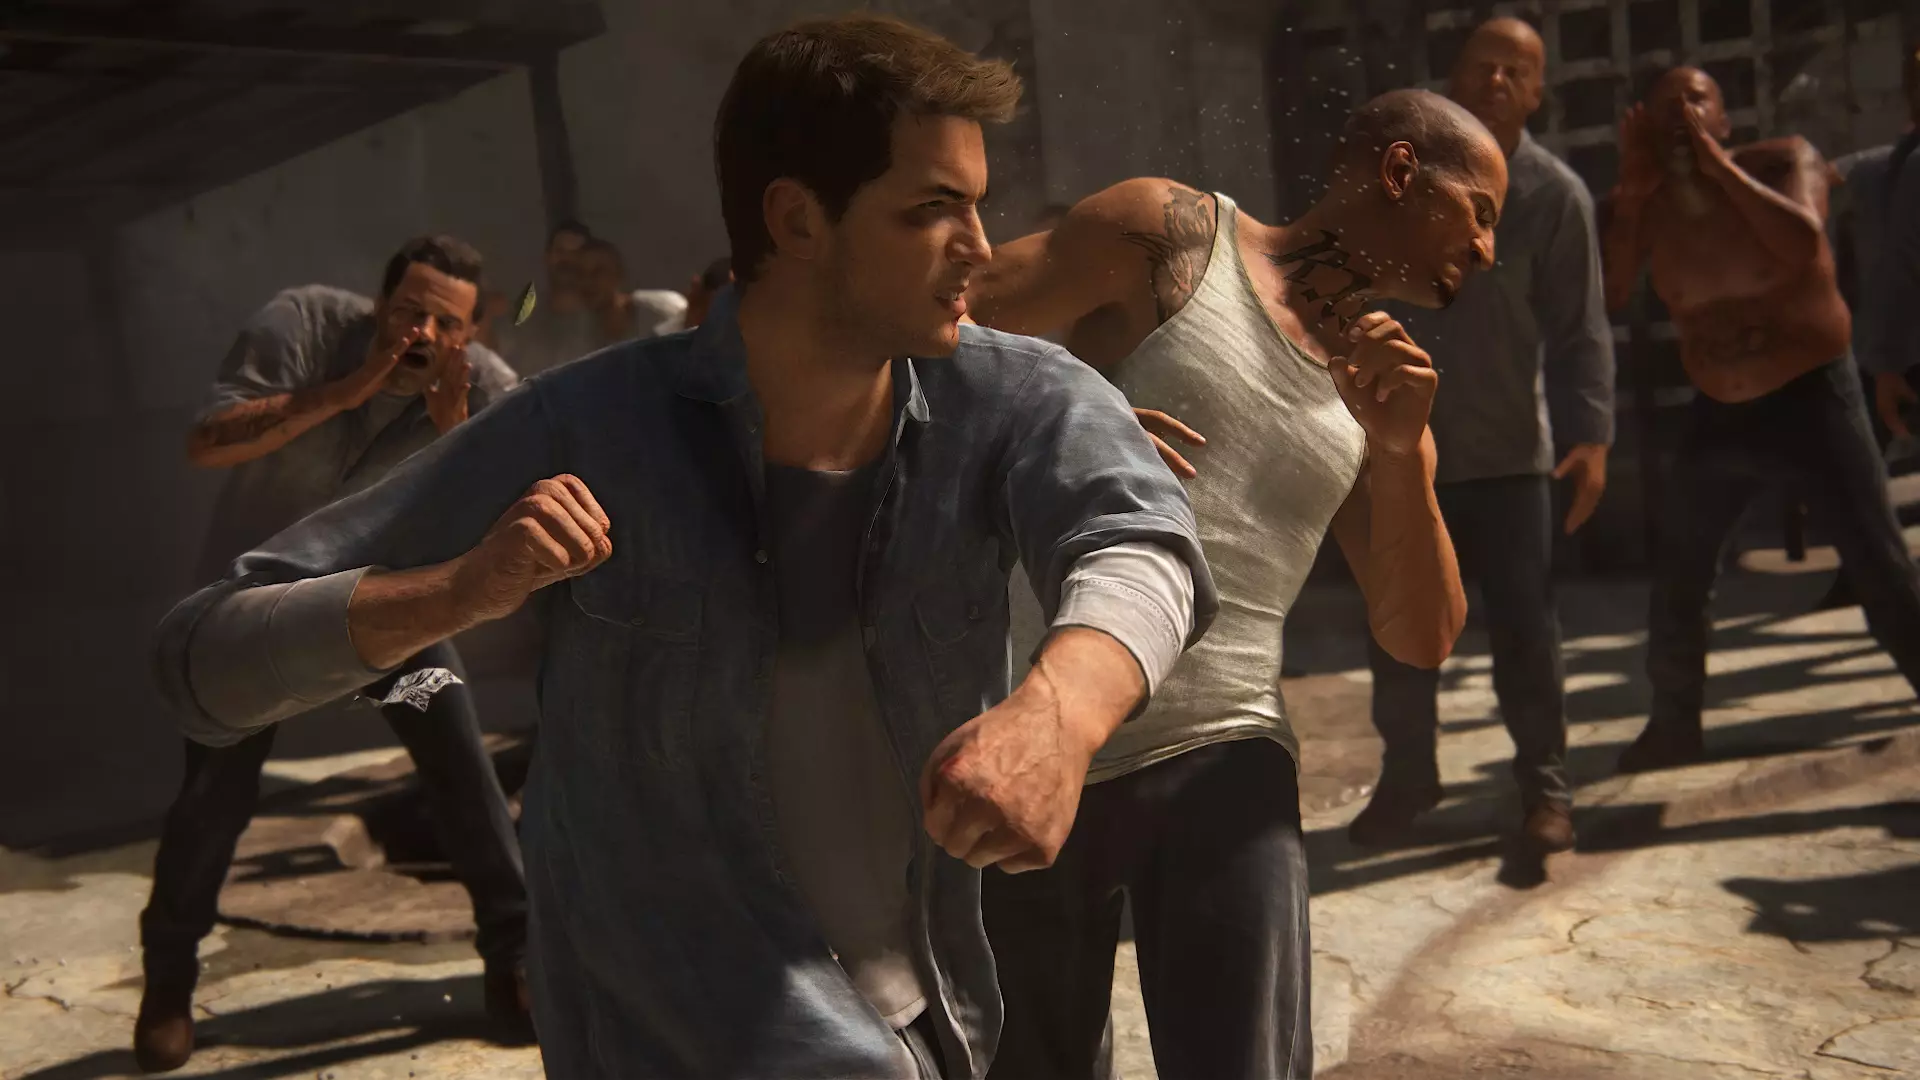 Uncharted 4: A Thief's End /